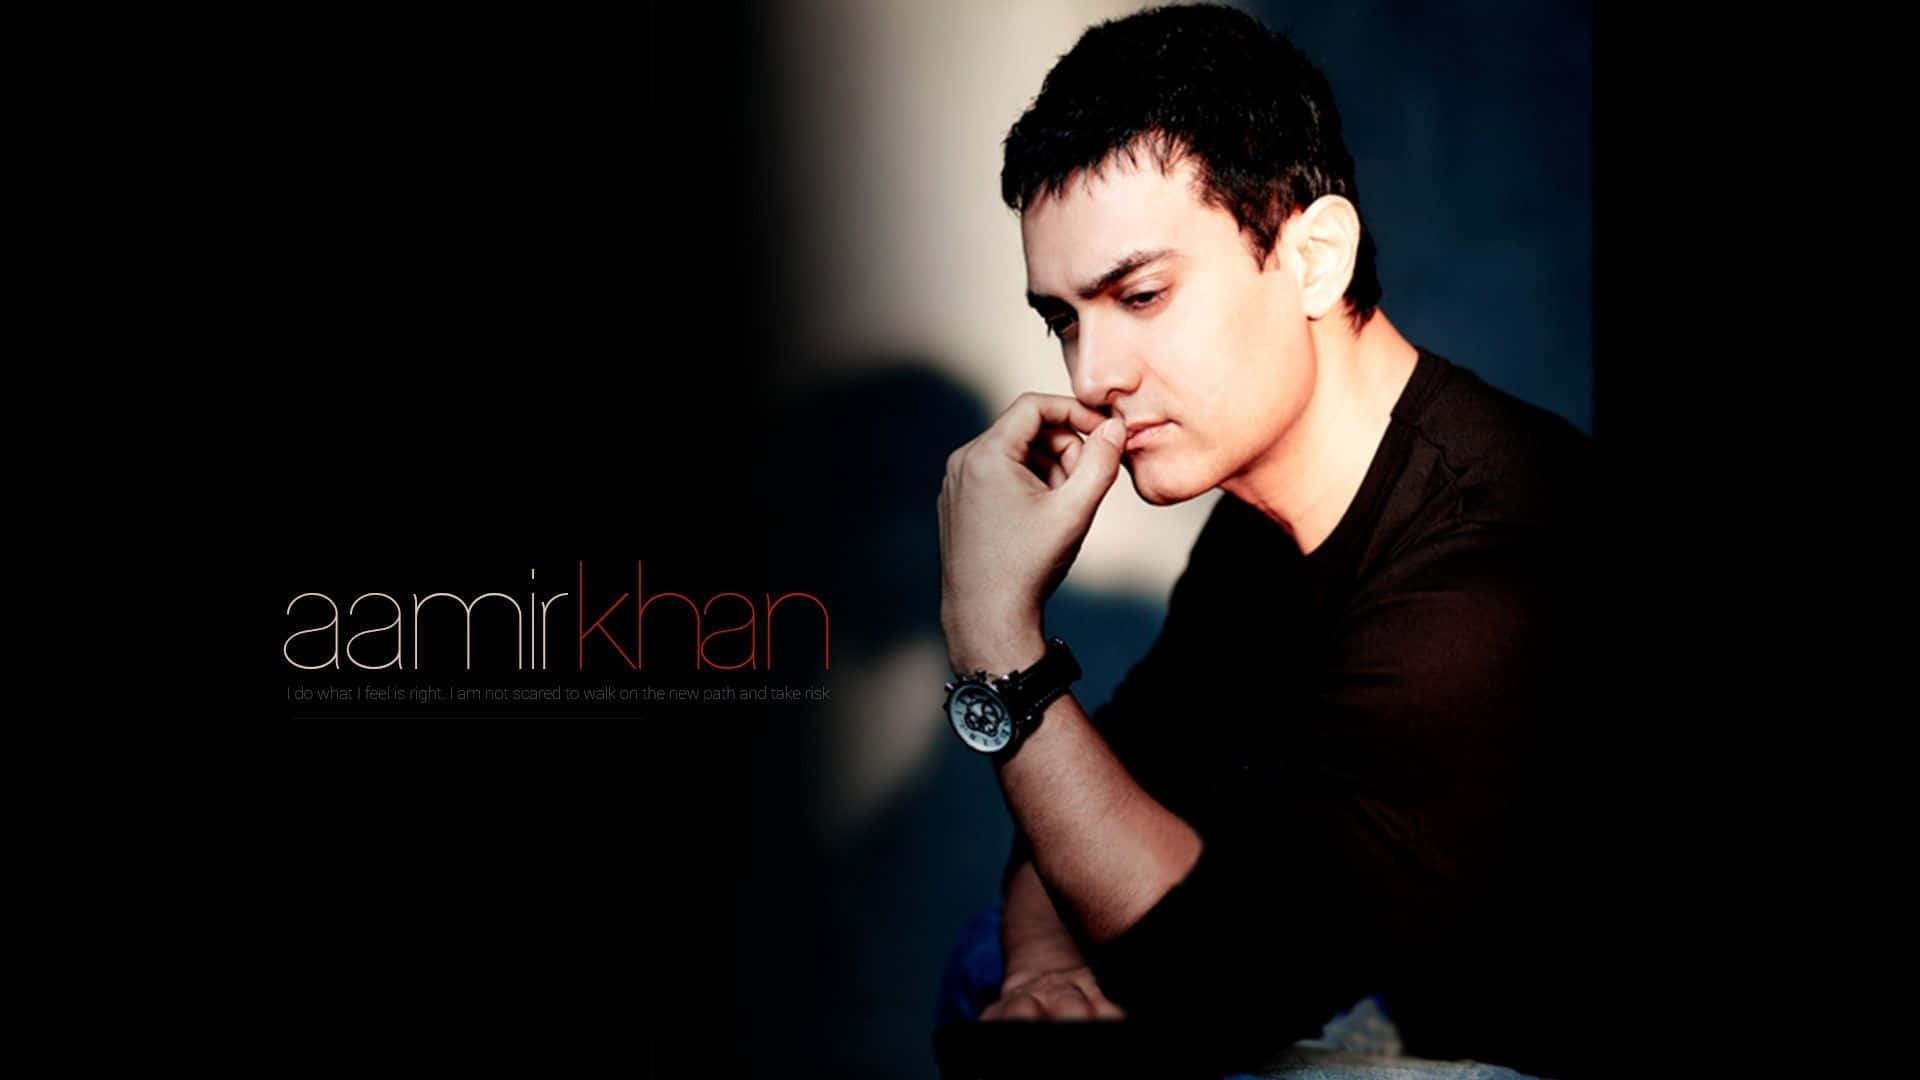 "Aamir Khan, Bollywood superstar and passionate actor"